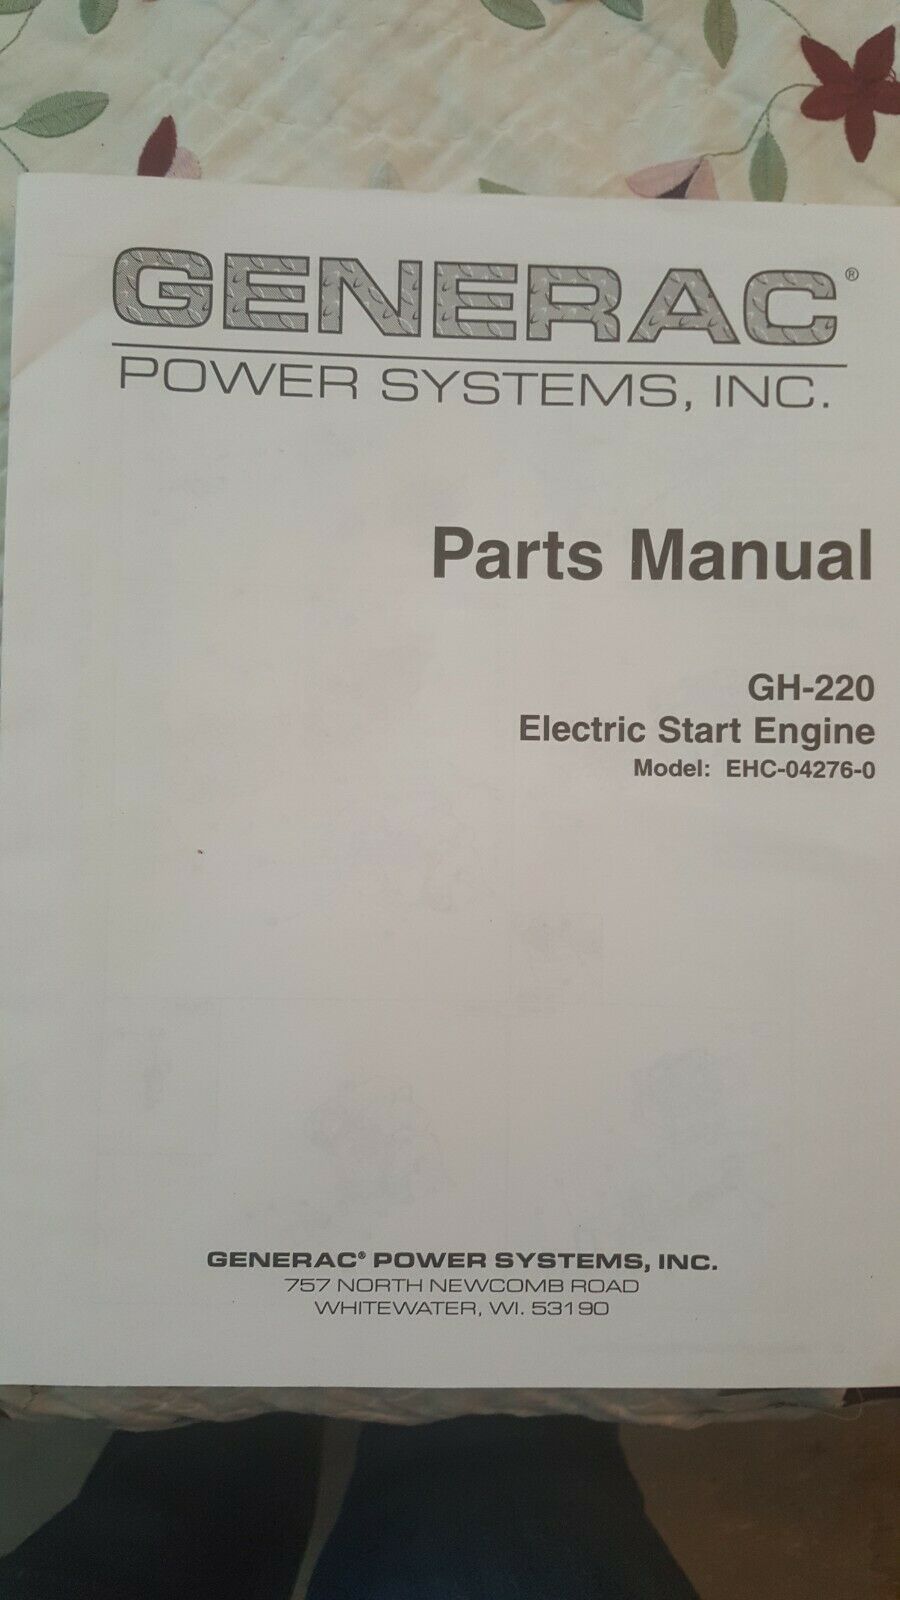 Primary image for General Parts Manual GH-220 Electric Start Engine Model: EHC-04276-0